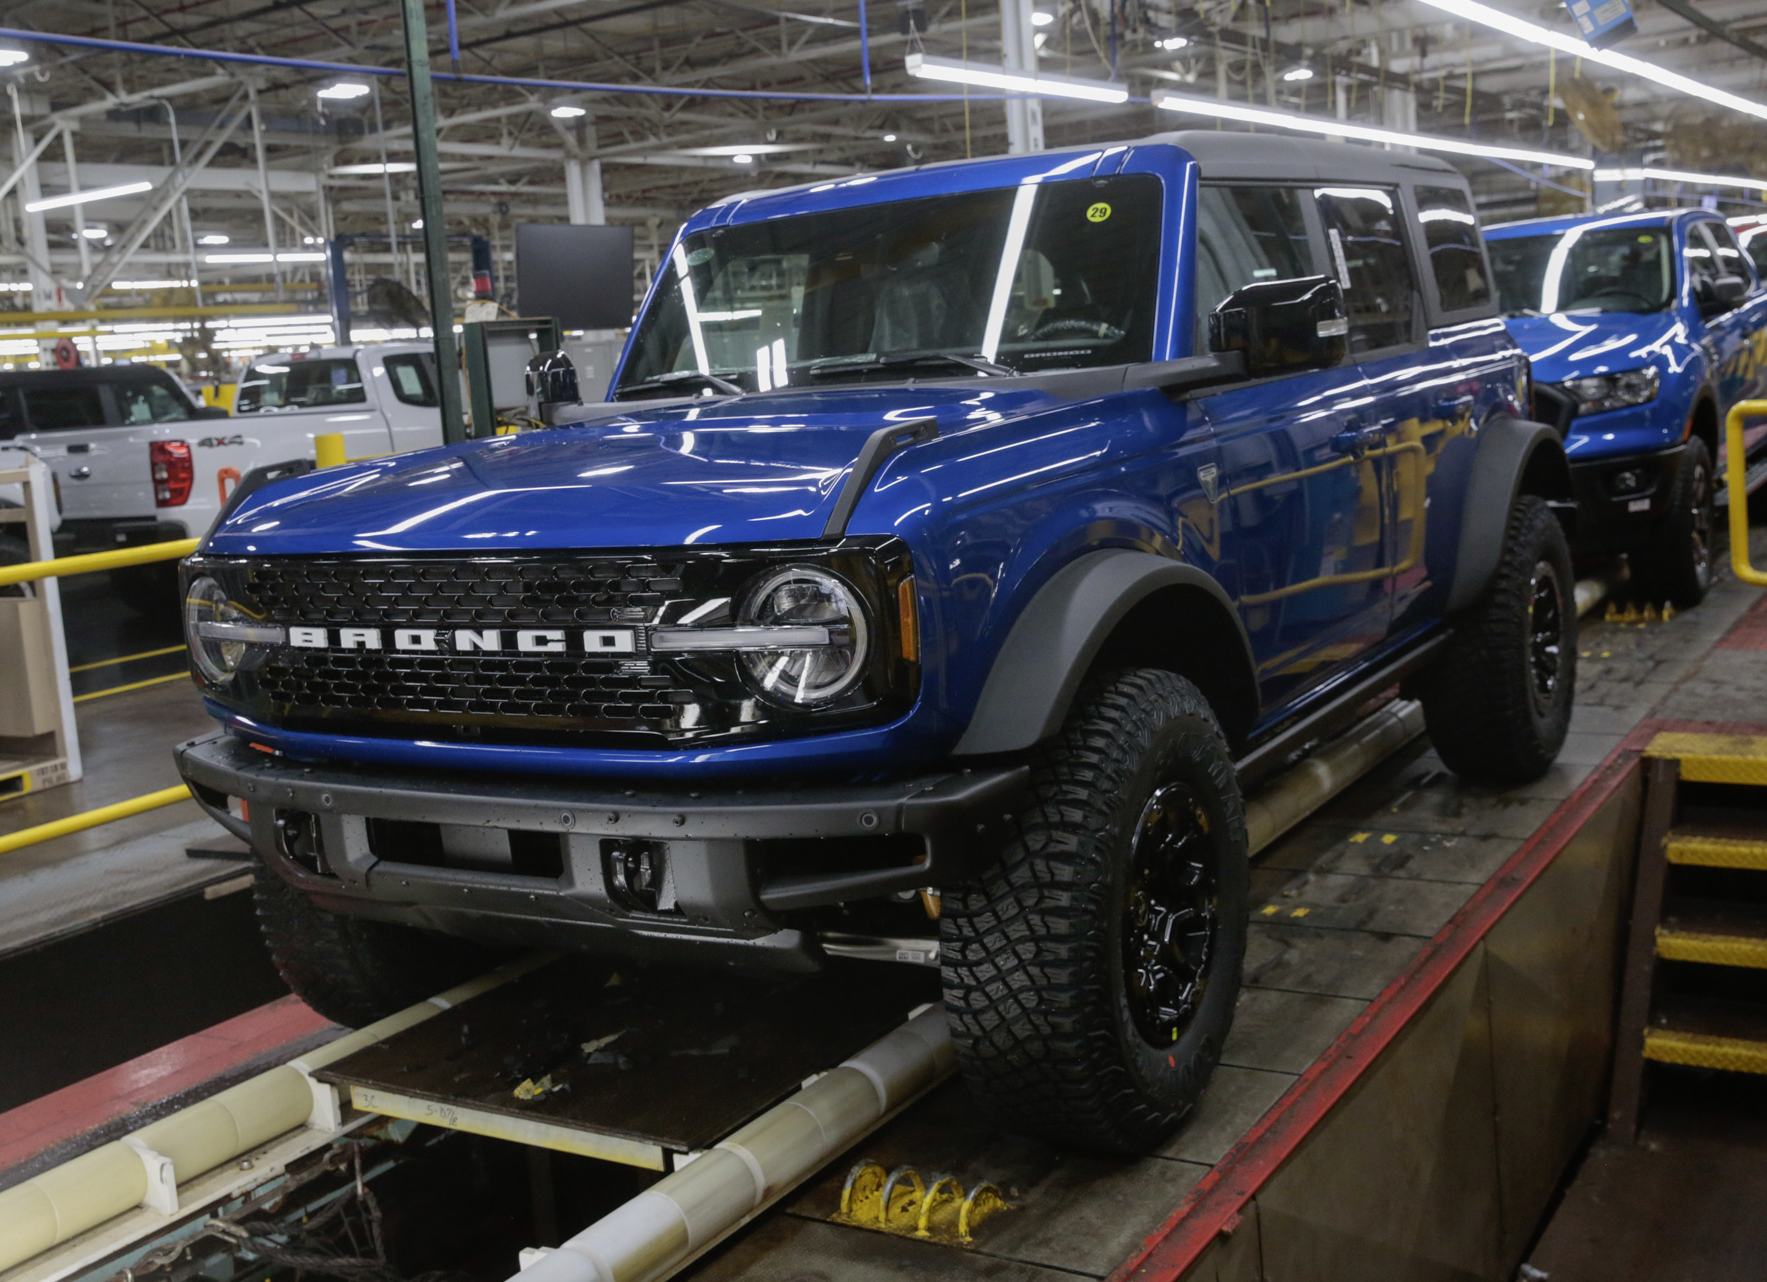 Ford Bronco Post Your Bronco Production Line Pics! (From Ford Emails Starting Today) Screen Shot 2021-10-27 at 2.35.58 PM